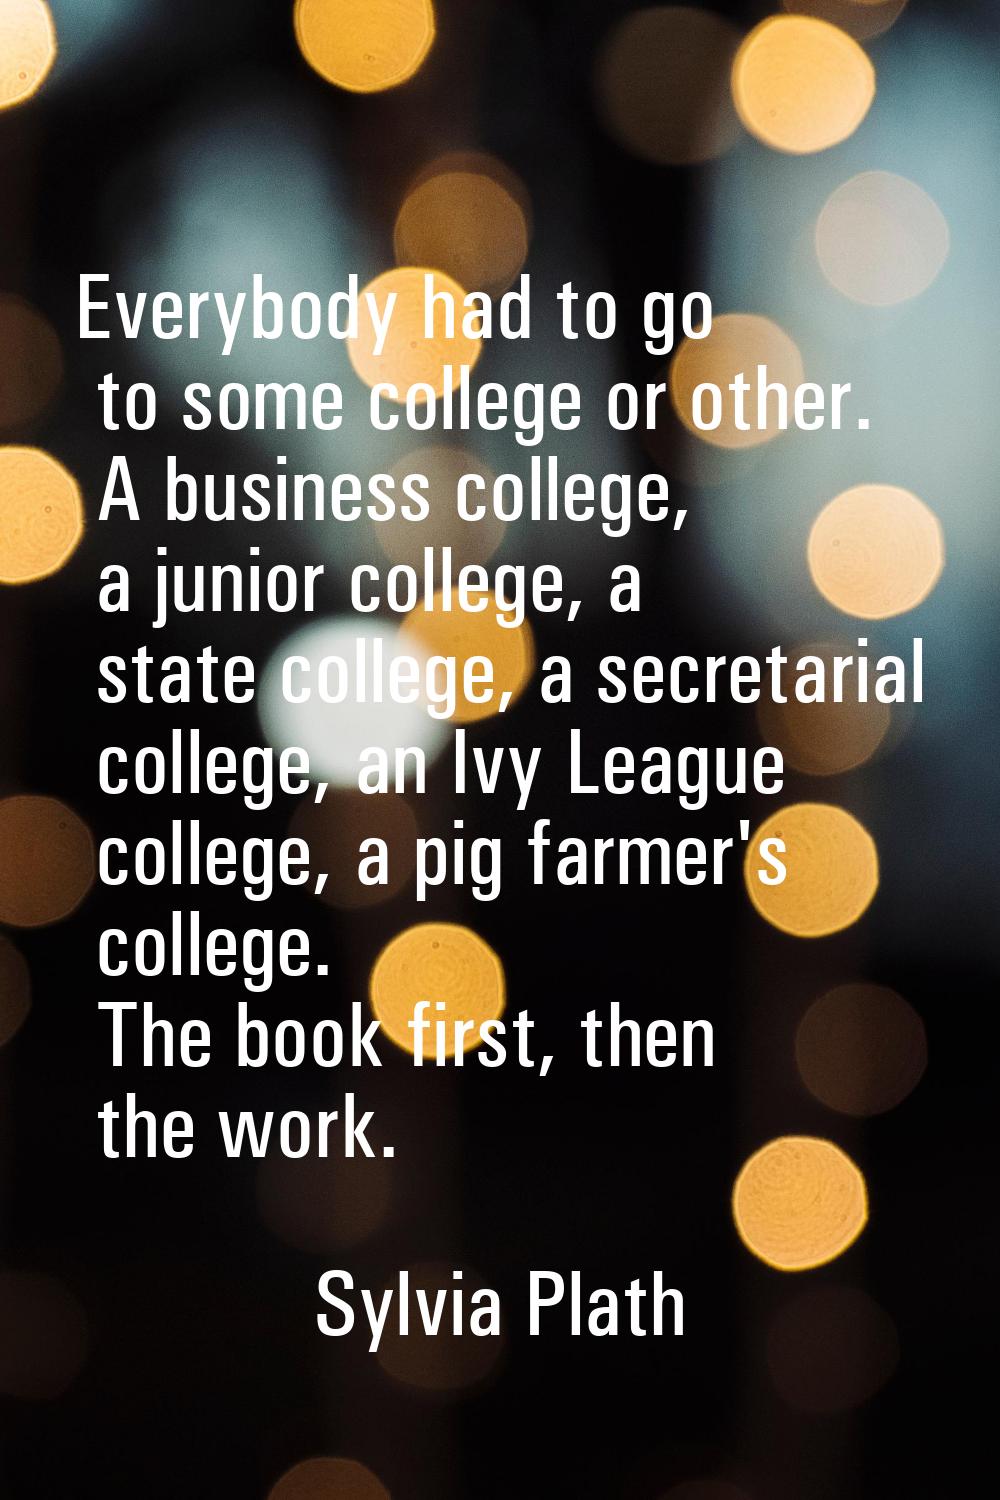 Everybody had to go to some college or other. A business college, a junior college, a state college